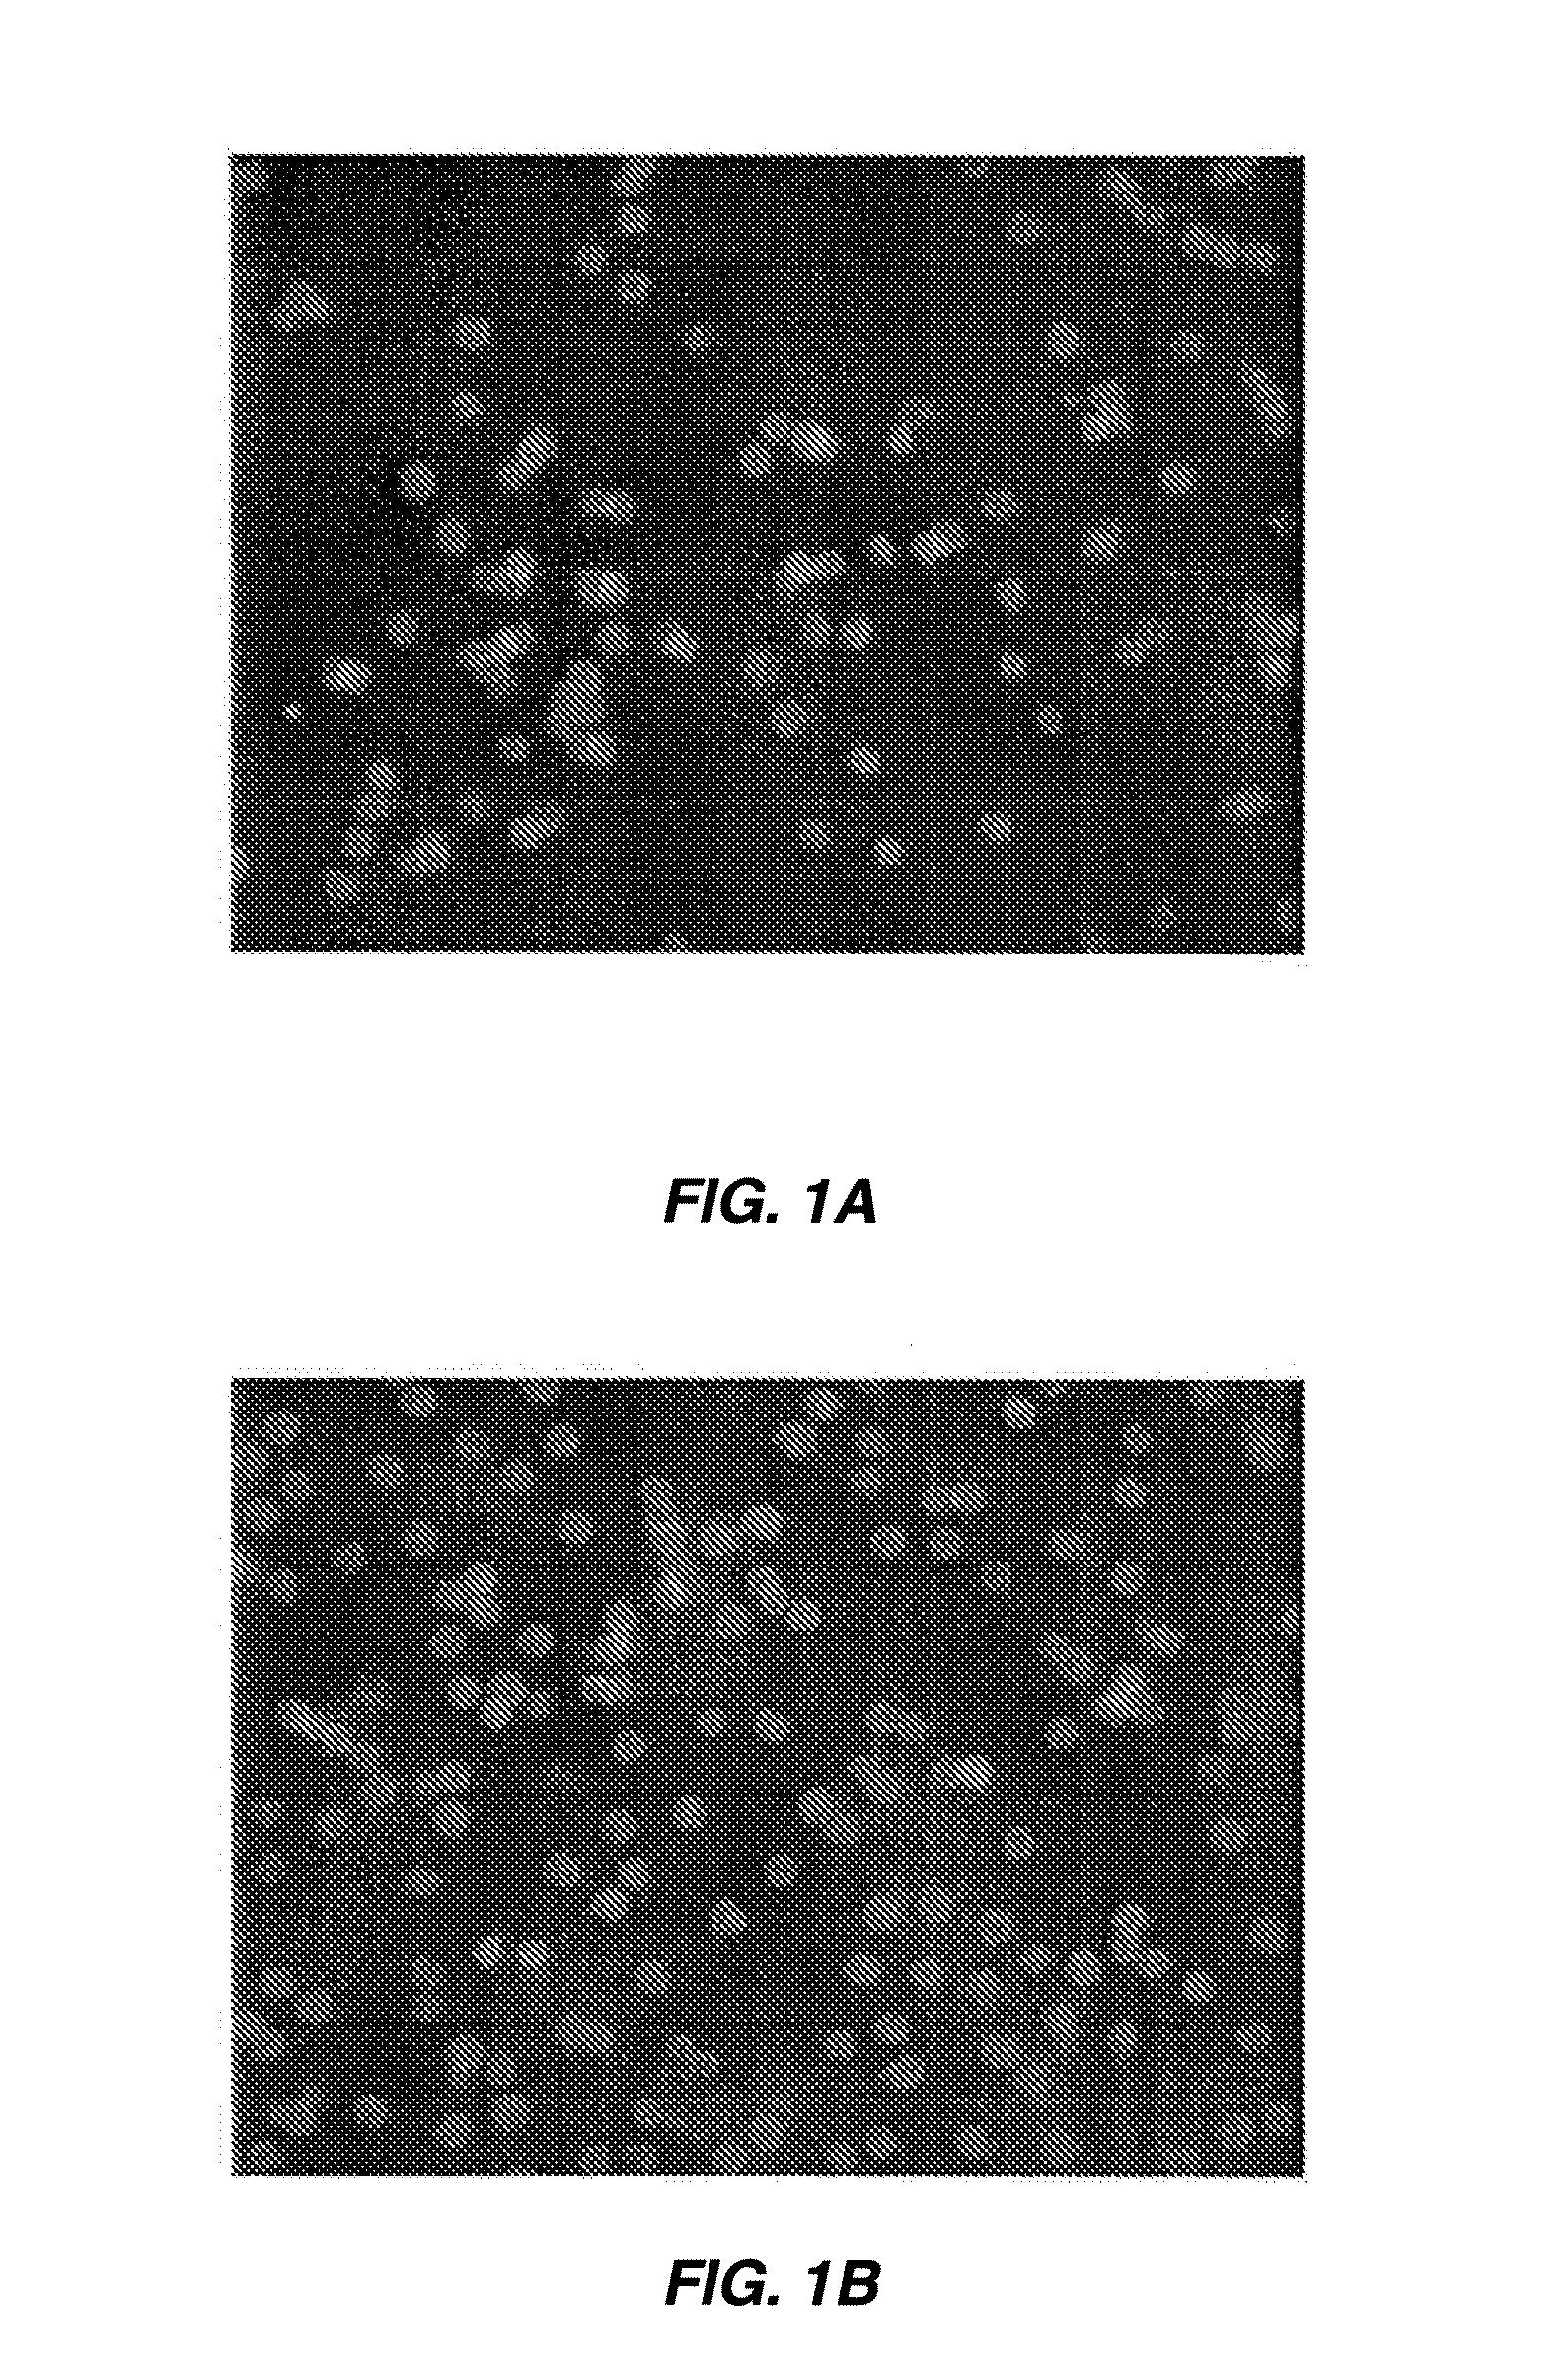 METHODS FOR PRODUCTION AND USE OF SUBSTANCE-LOADED ERYTHROCYTES (S-IEs) FOR OBSERVATION AND TREATMENT OF MICROVASCULAR HEMODYNAMICS